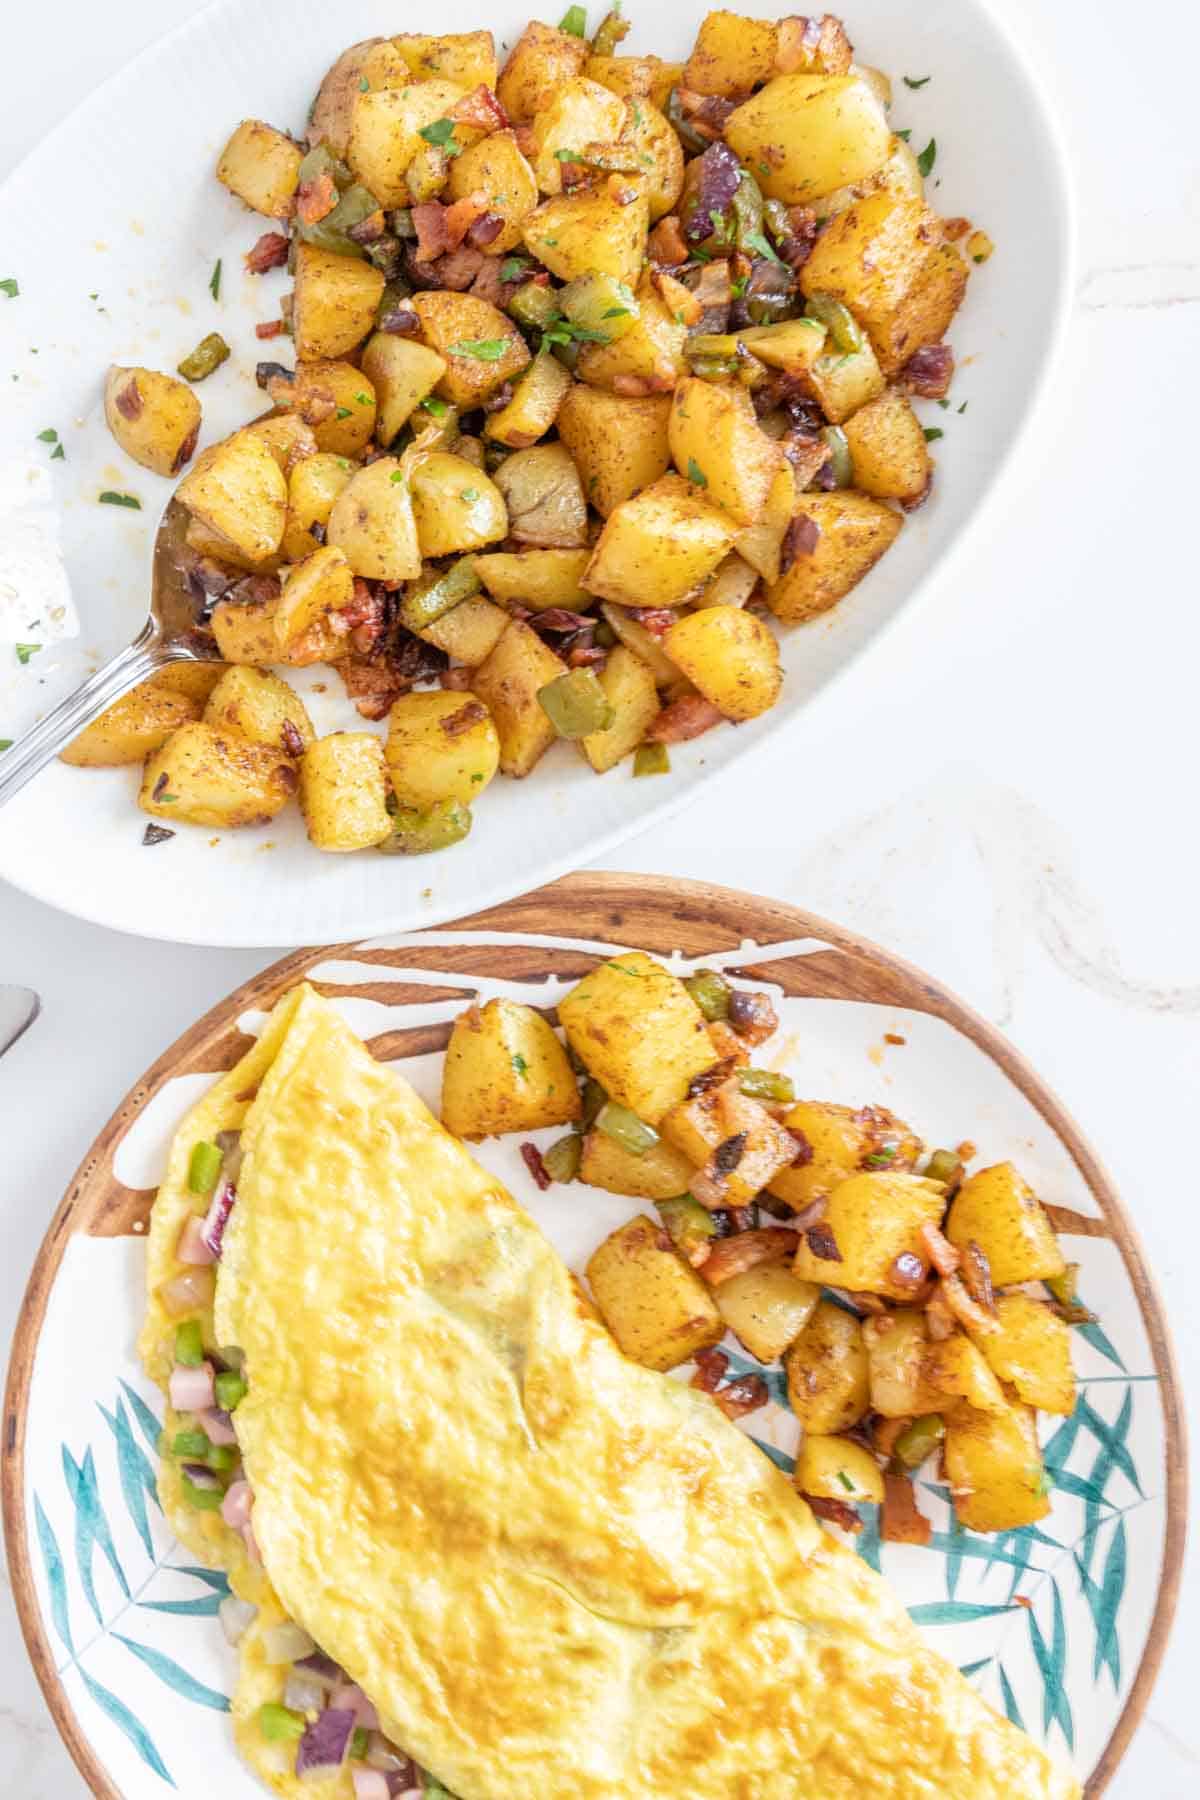 Breakfast potatoes on a serving dish next to a diner's plate with potatoes and an omelet.